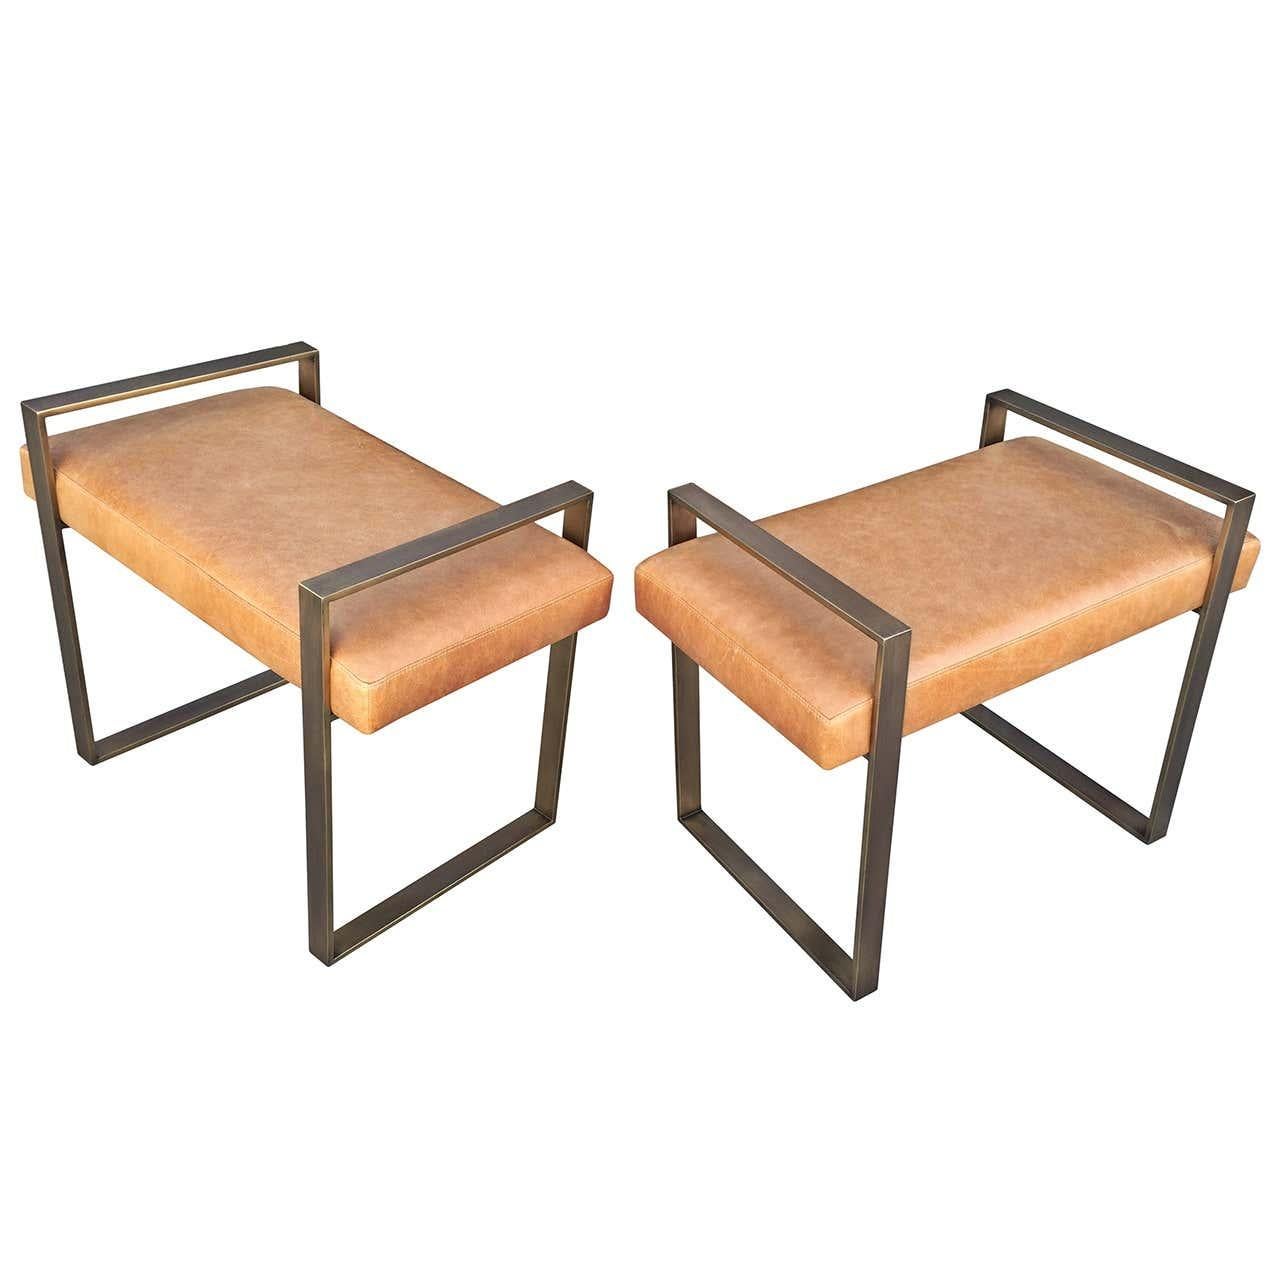 Mid-Century Modern Pair of Brass Benches by Charles Hollis Jones #HR-84, Signed For Sale